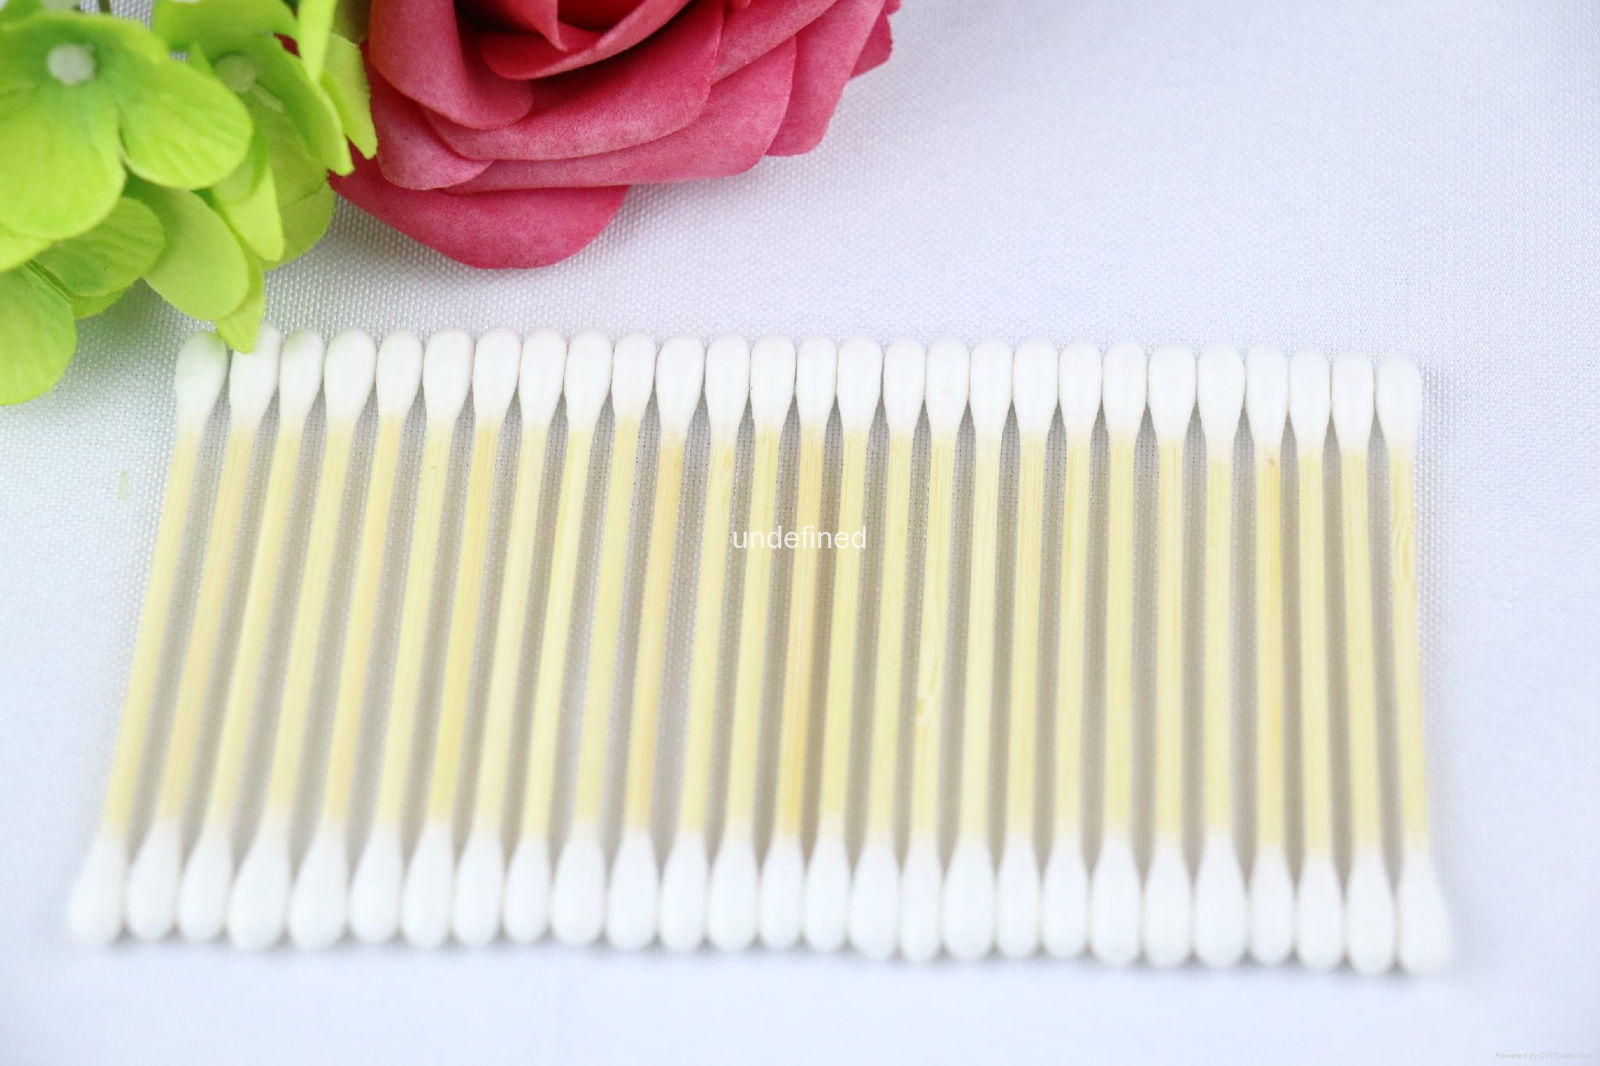 230pcs high quality bamboo stick cotton buds/ cotton swabs personal care OEM man